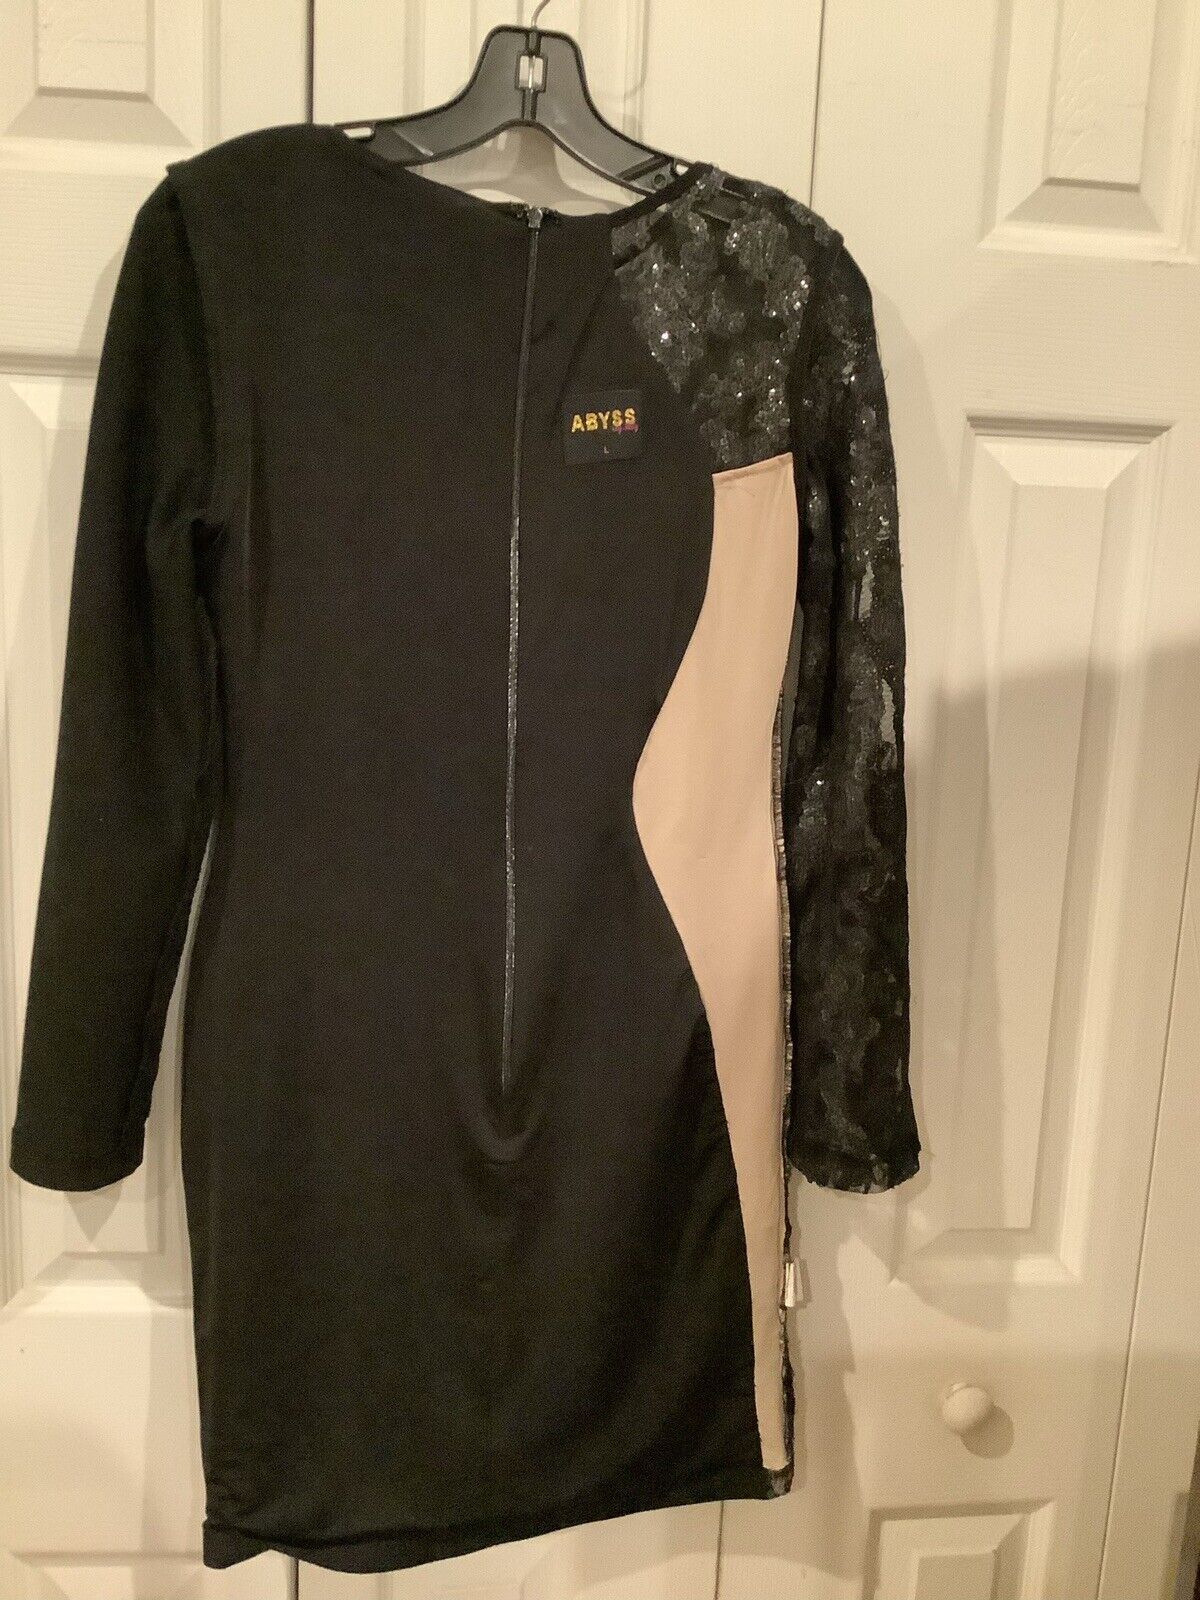 Abyss by Abby Beautiful Black Dress Long Sleeve S… - image 7